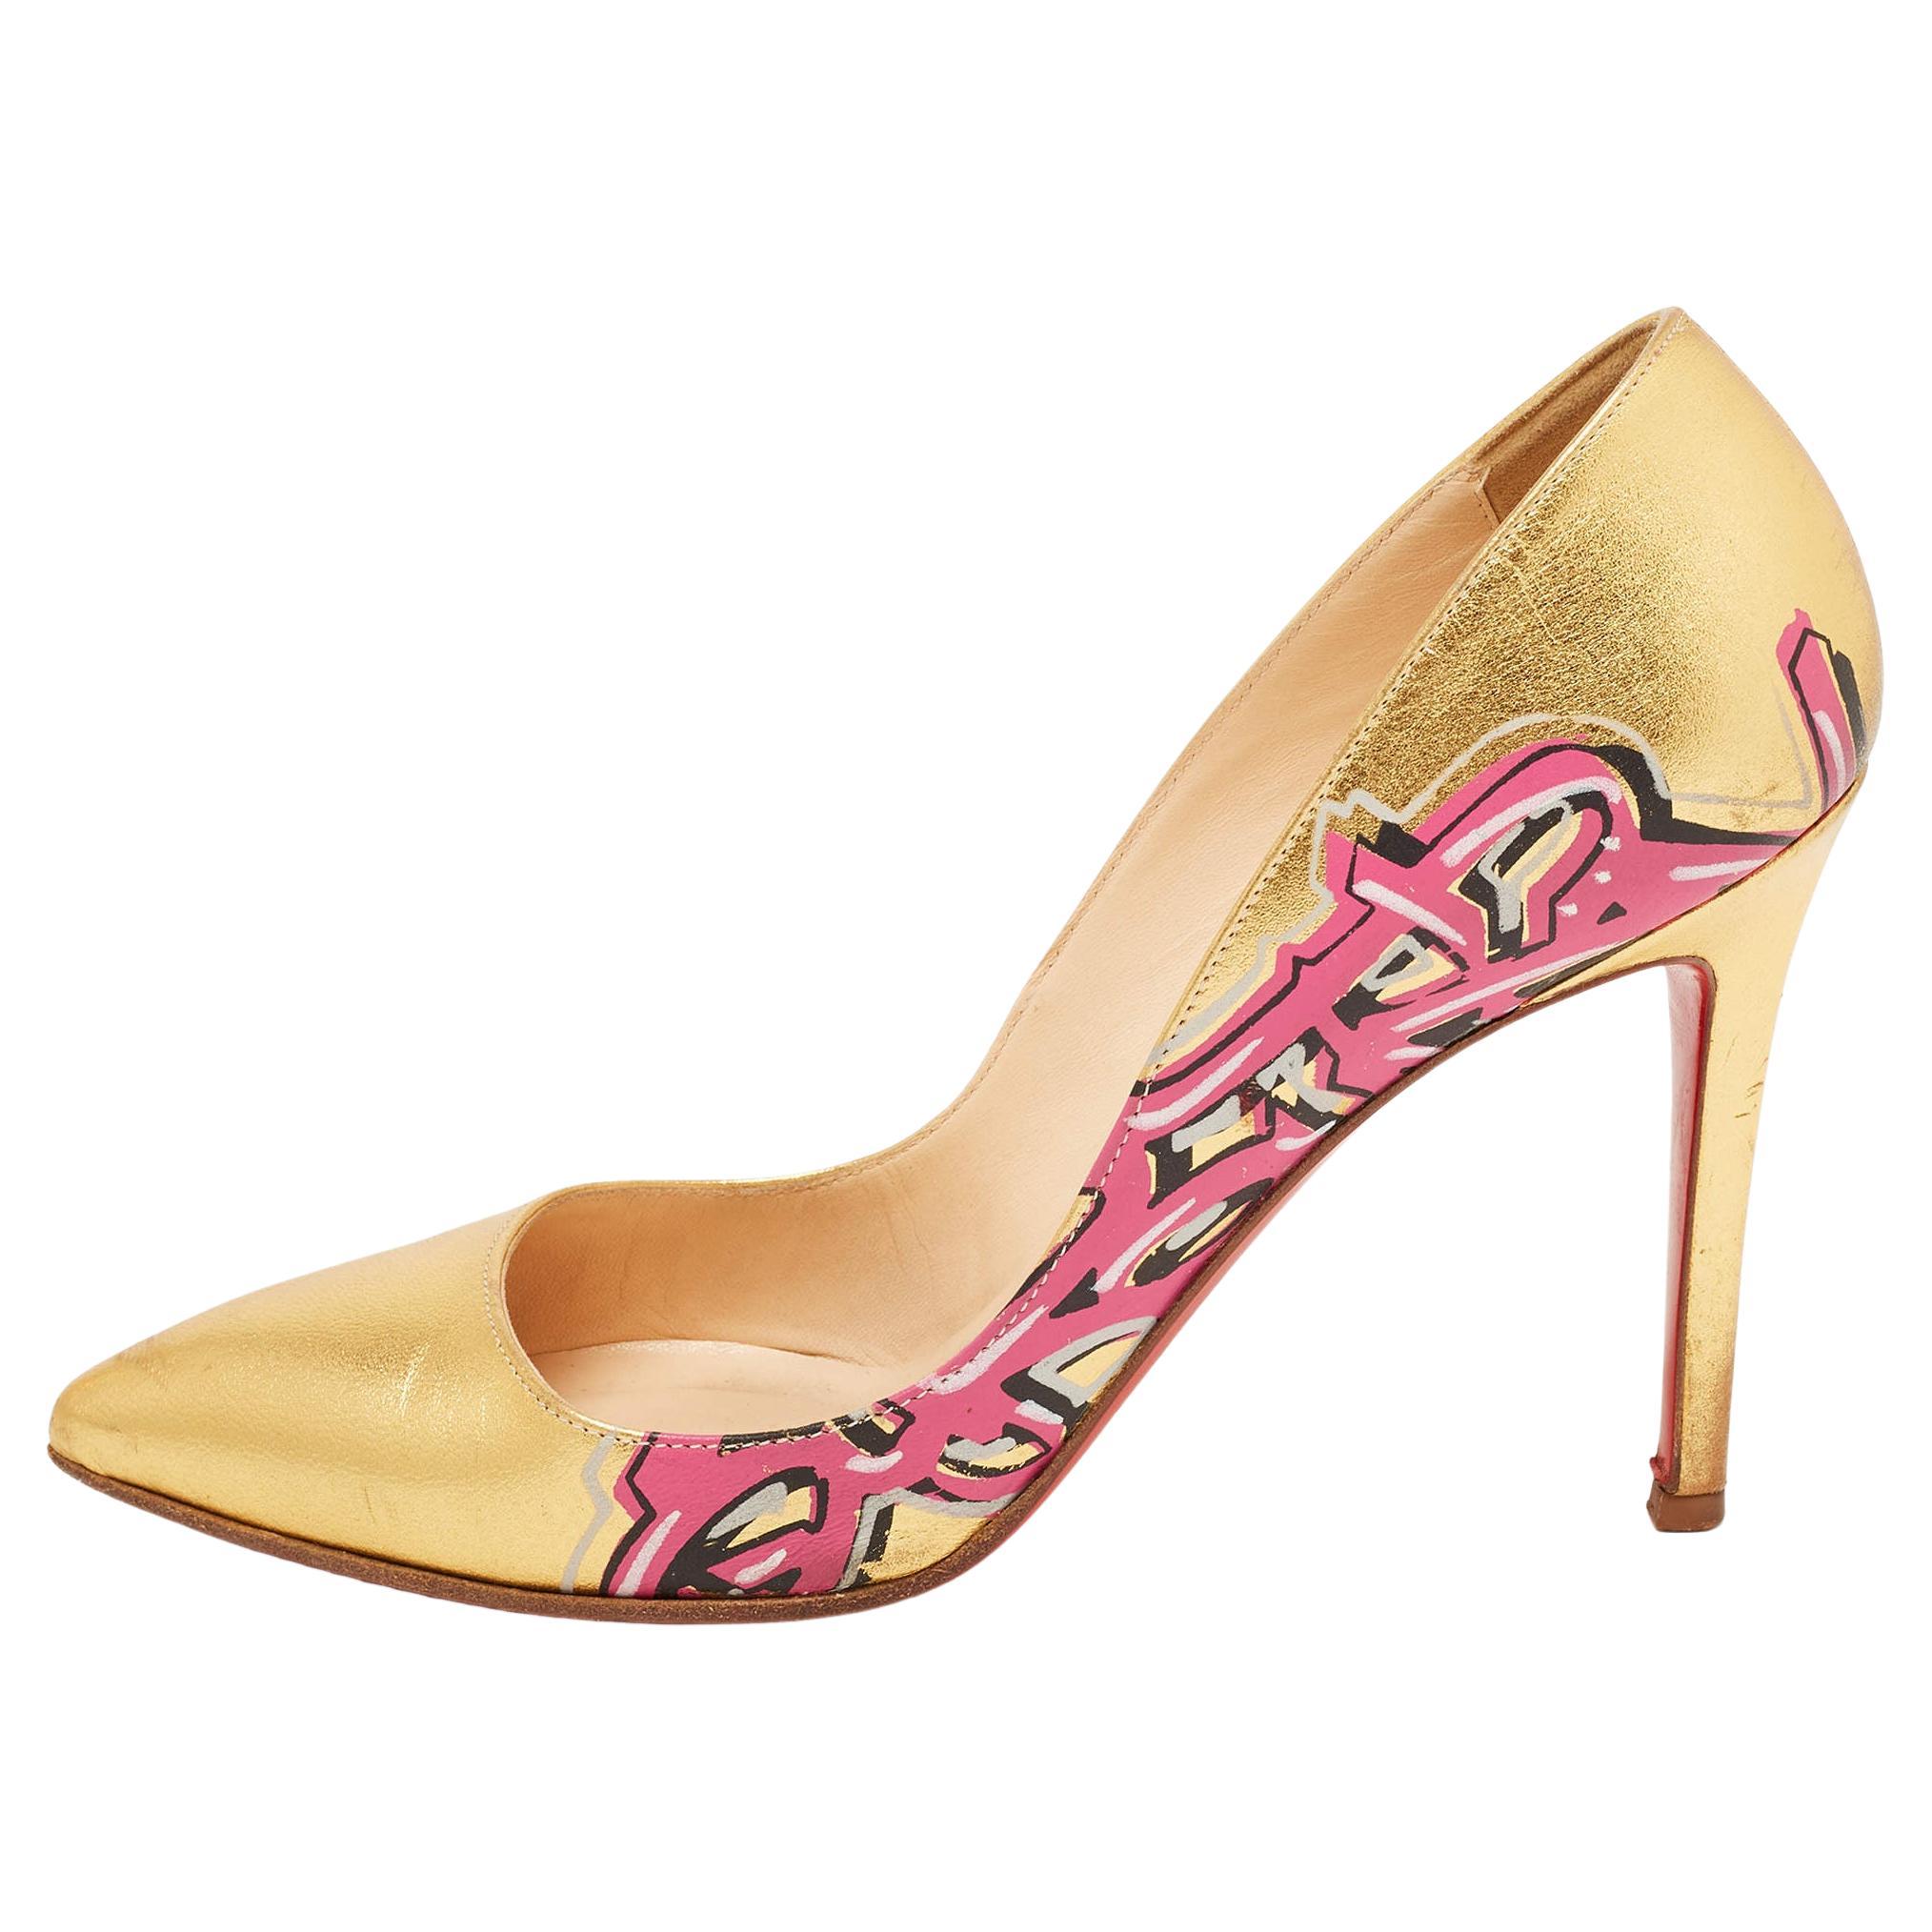 Christian Louboutin Gold Leather Pigalle Graffiti Pumps Size 37.5 For Sale